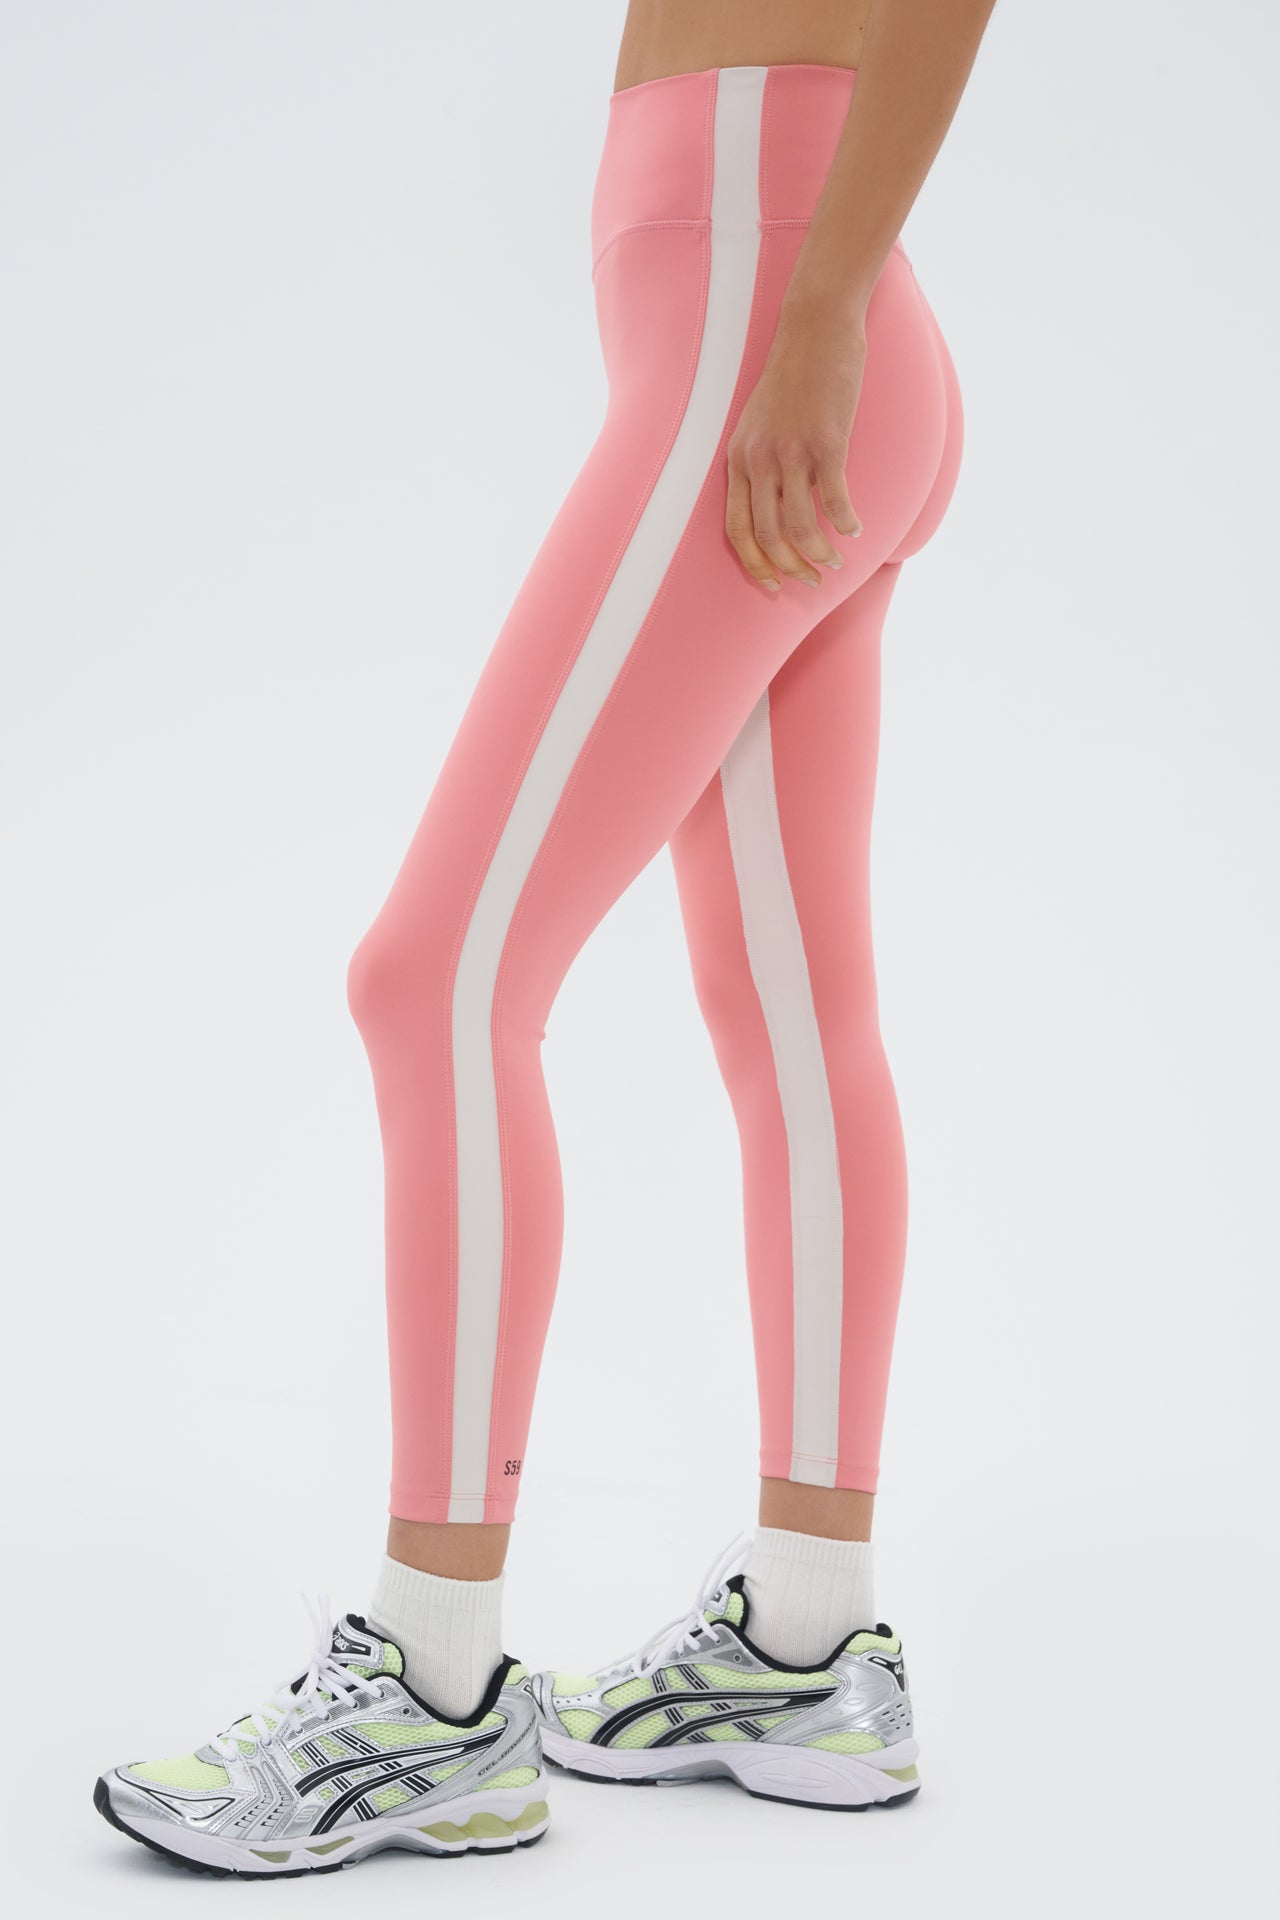 Side view of girl wearing light pink leggings with a white stripe down the side and inseam and multicolored shoes